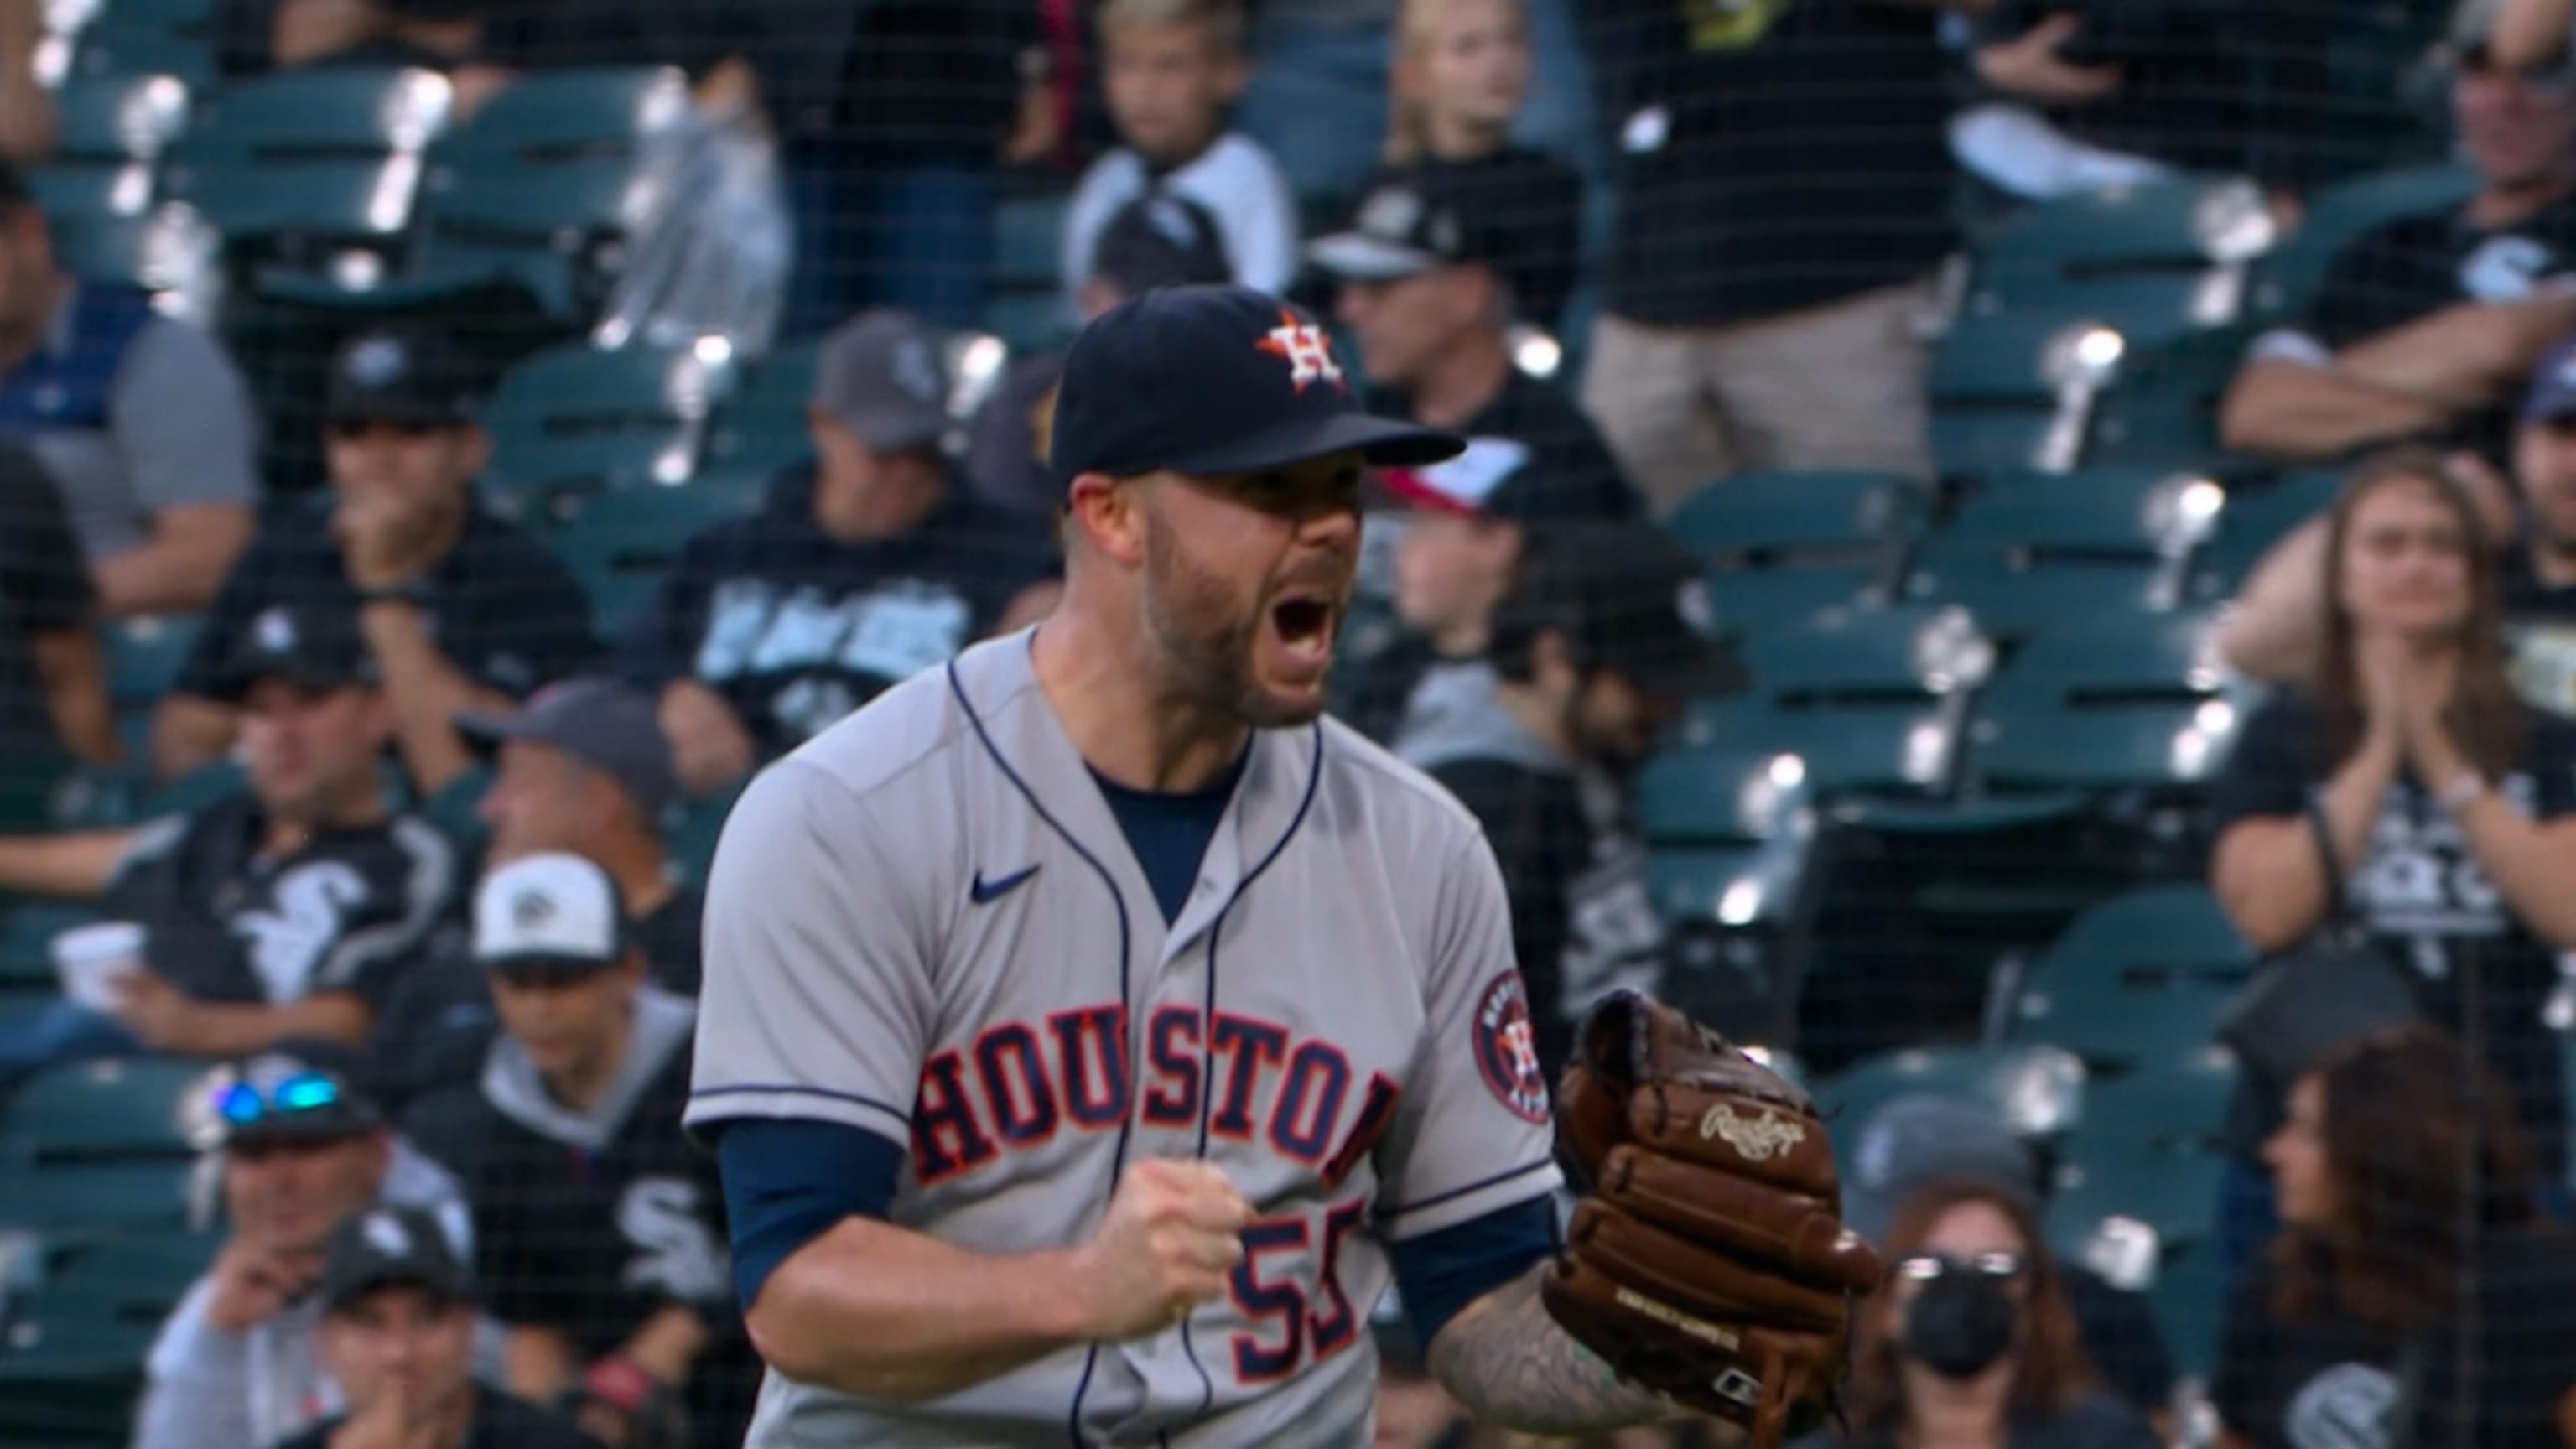 Astros ALDS: Game 4 against Minnesota Twins moves to primetime